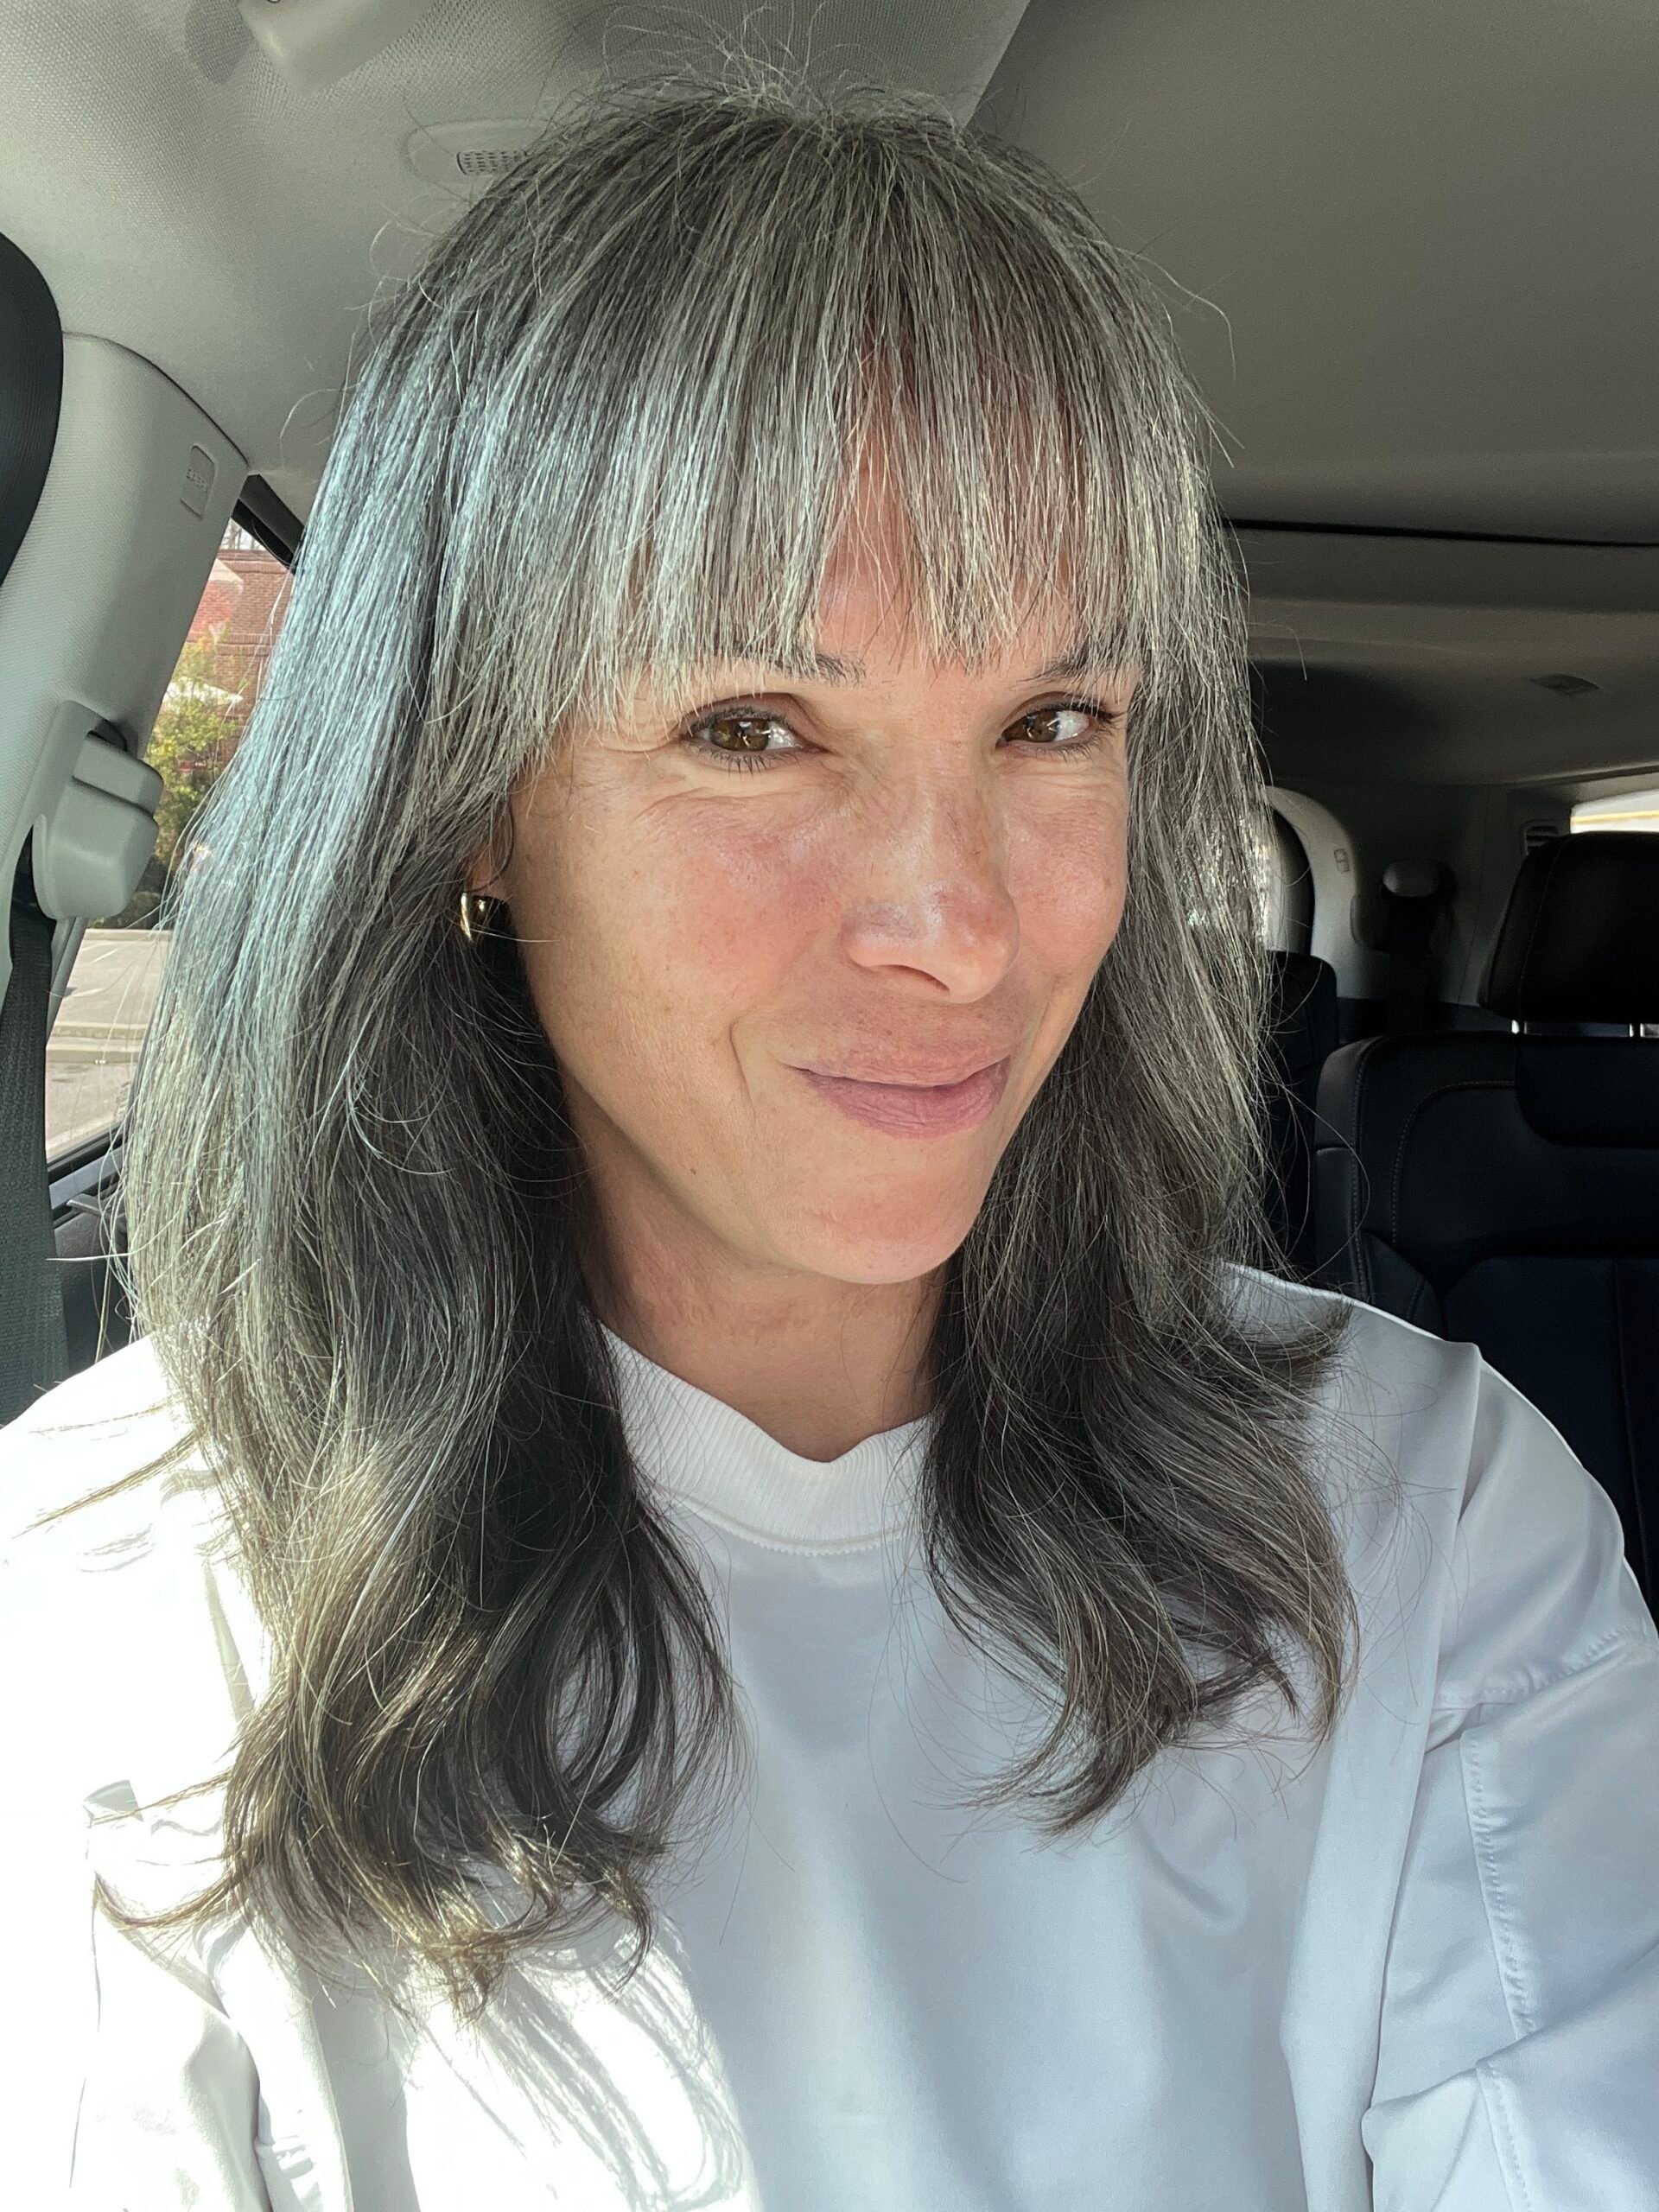 A woman with long gray hair sits in her car.